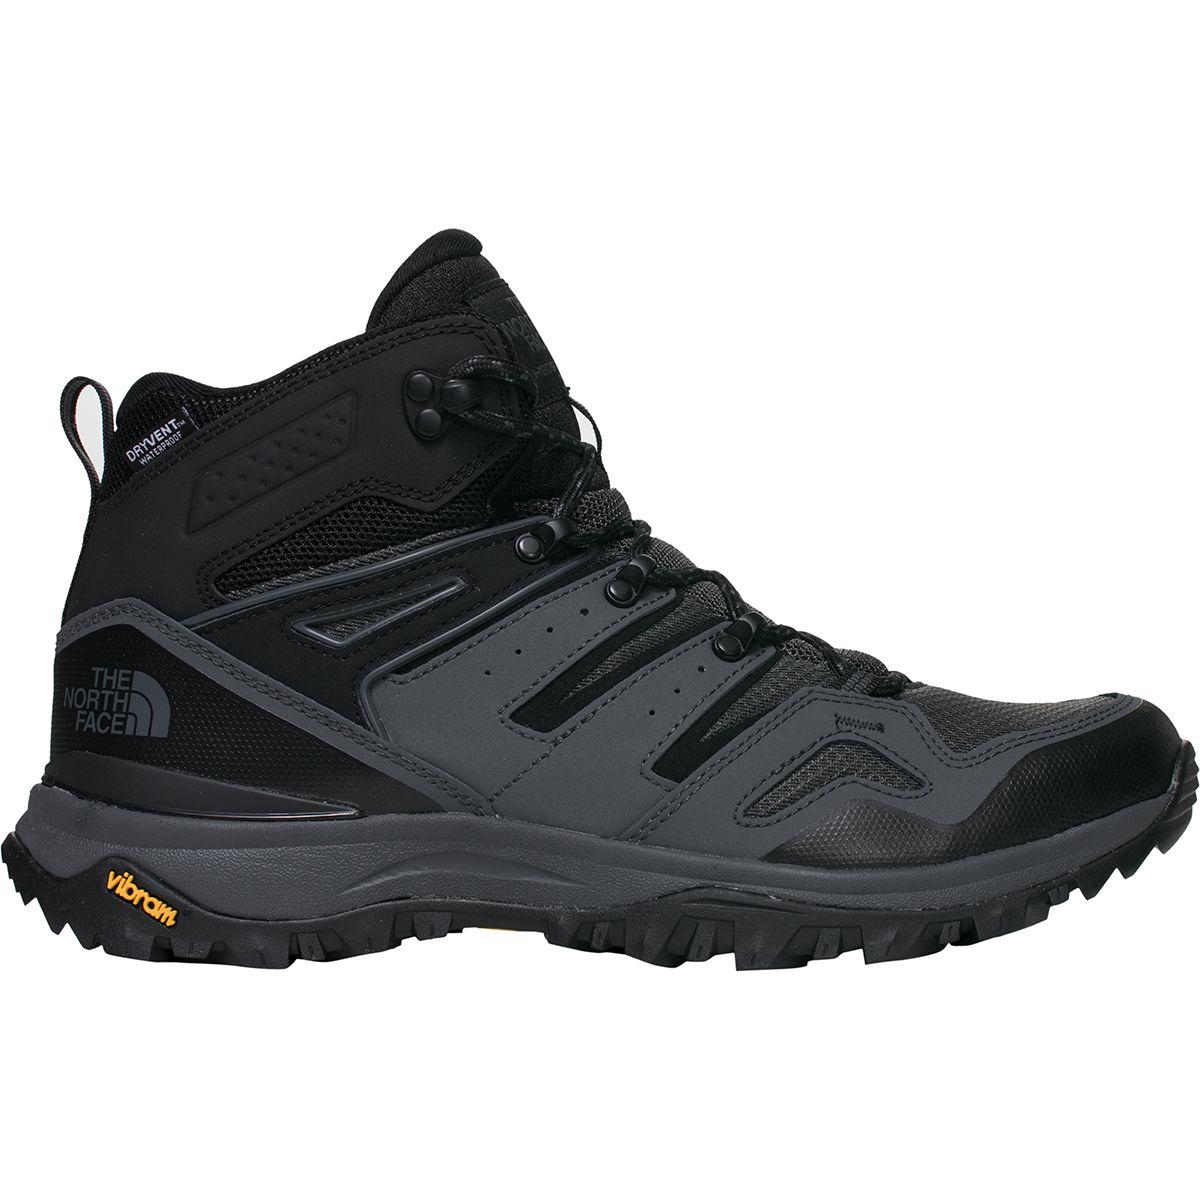 The North Face Leather Hedgehog Fastpack Ii Mid Waterproof Hiking Boot ...